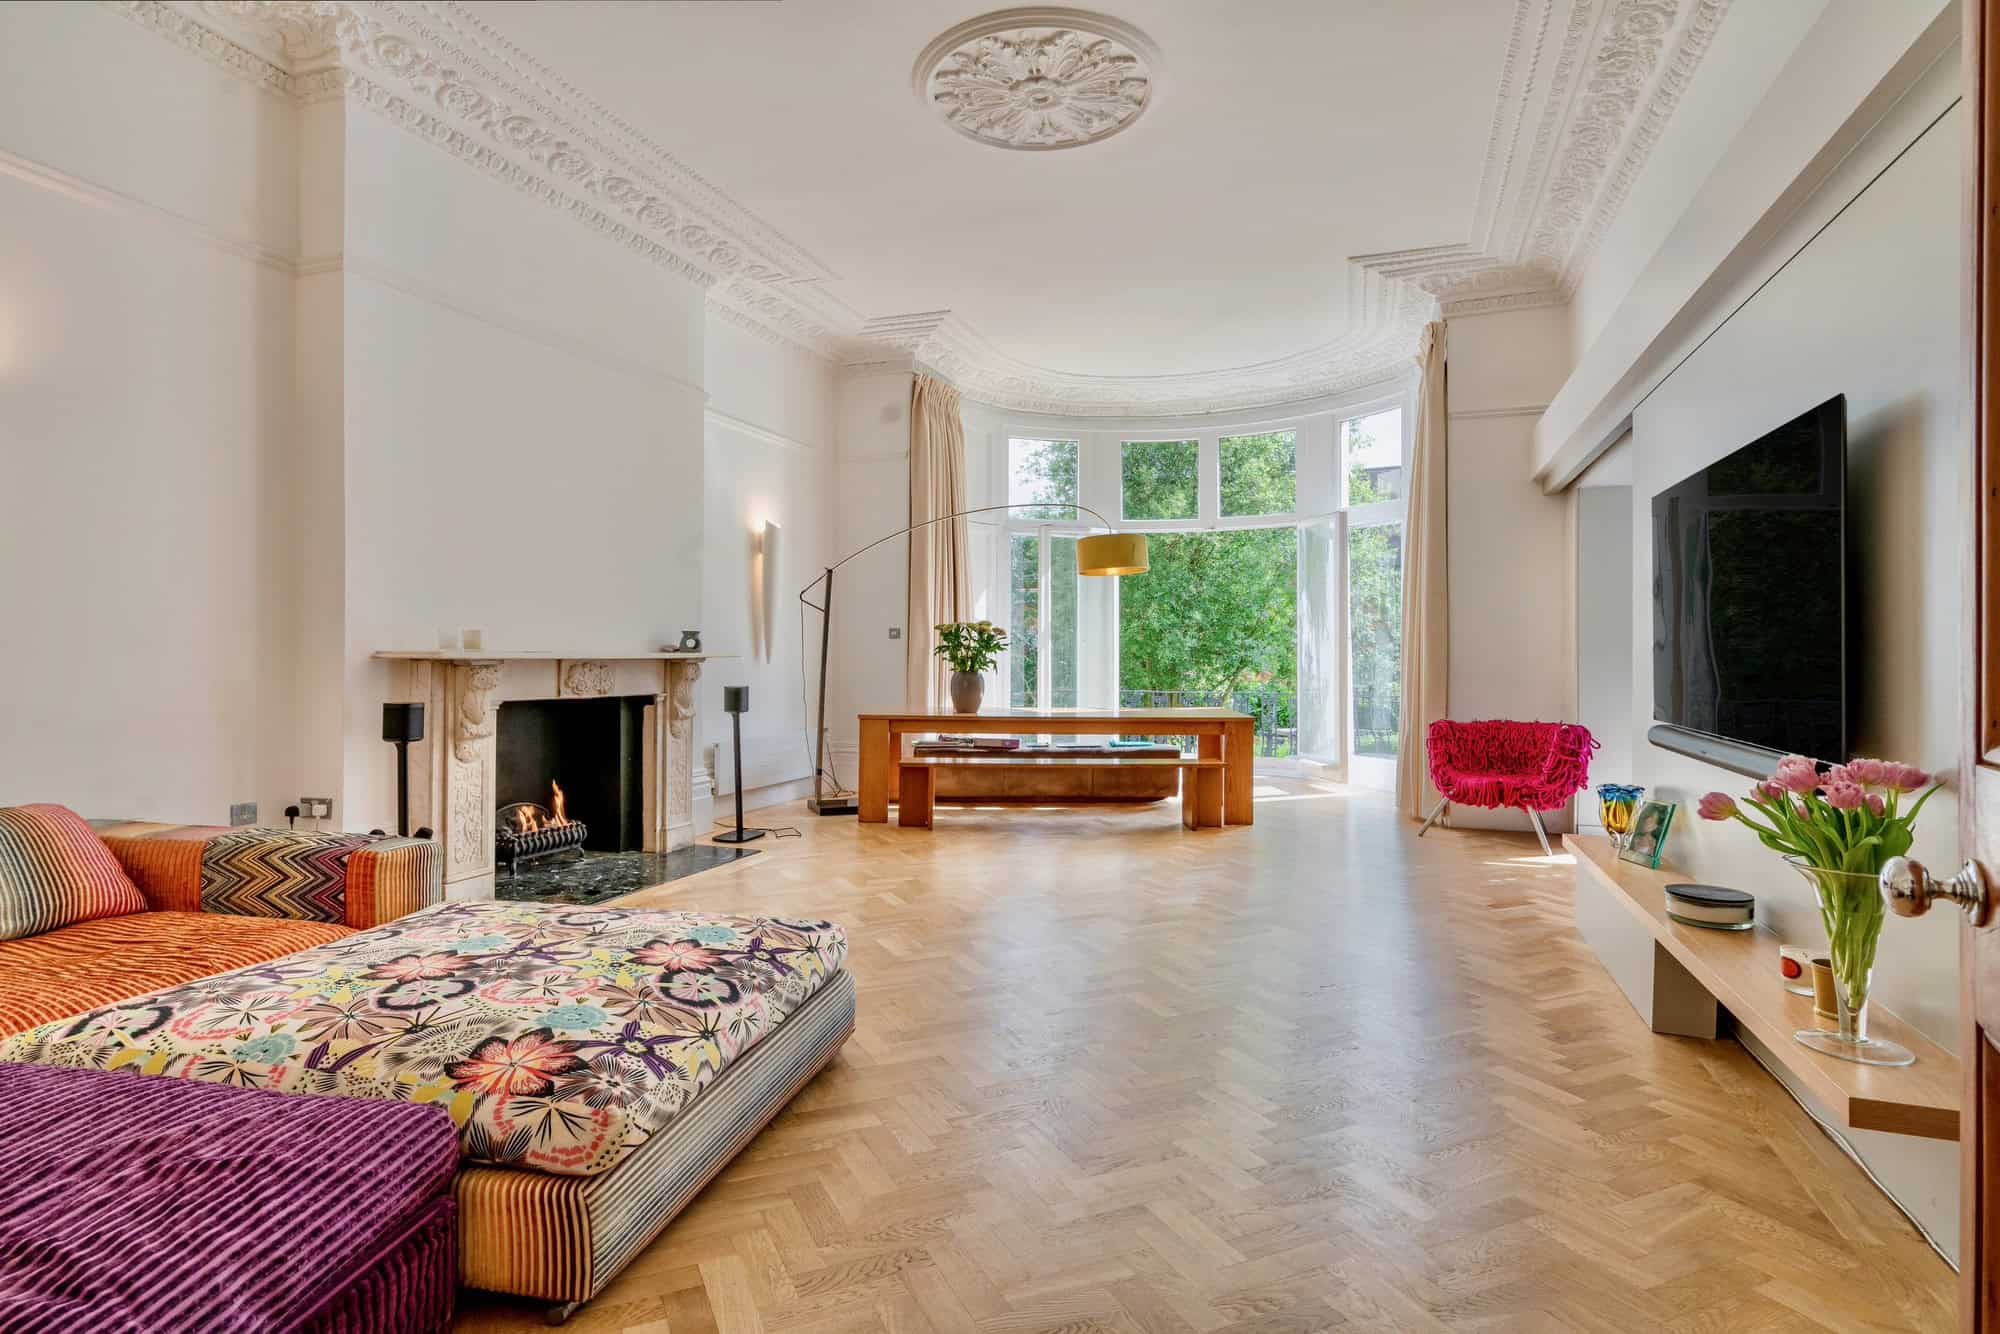 Belsize NW3 - A luxury apartment in Belsize Park. Light filled spacious interiors with original features and contemporary styling - The Location Guys